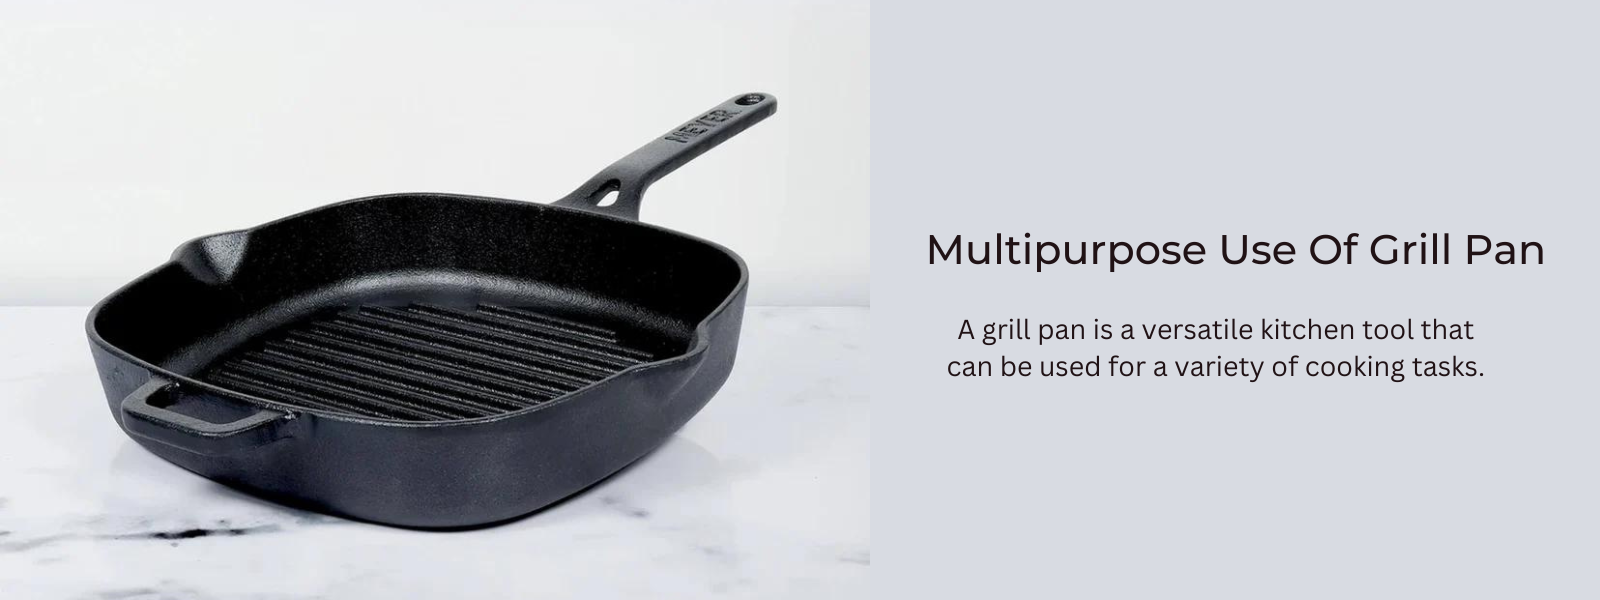 The Multipurpose Use Of Grill Pan At Home